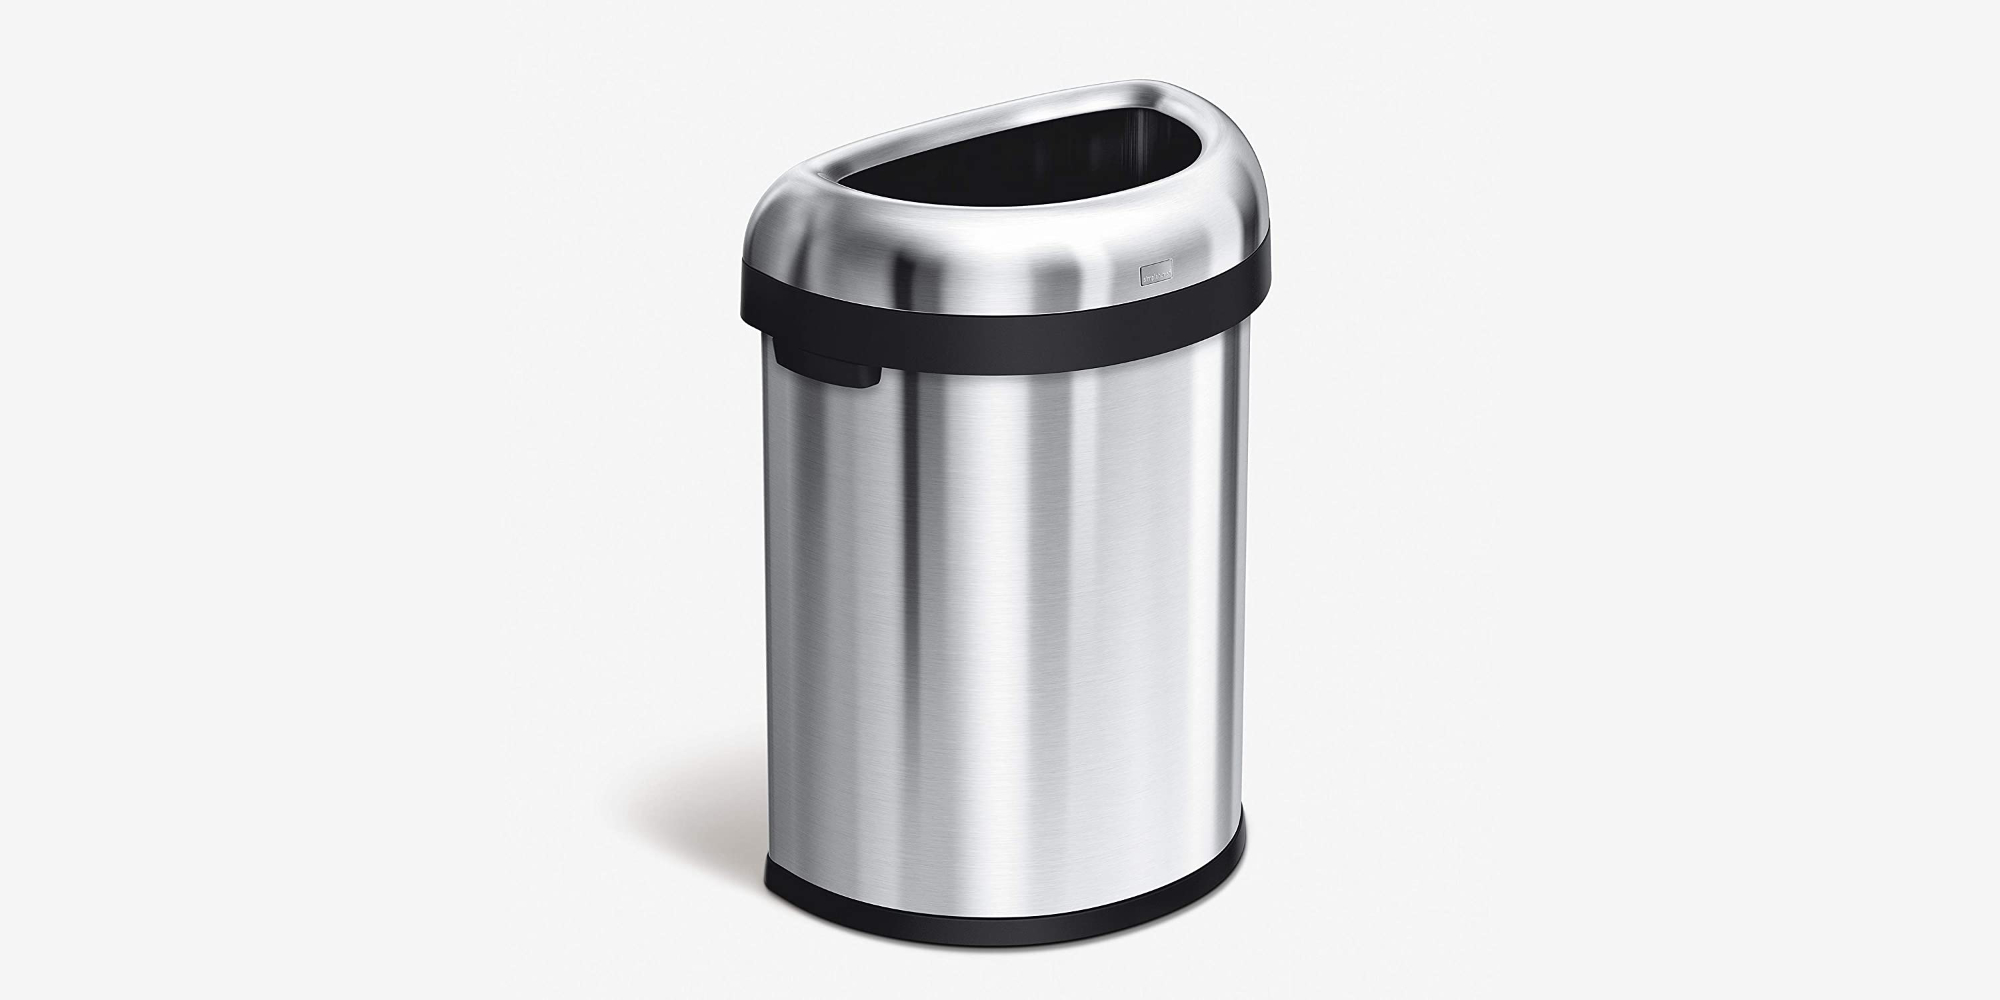 simplehuman's premium 21.1-Gal. Stainless Steel Trash Can is yours